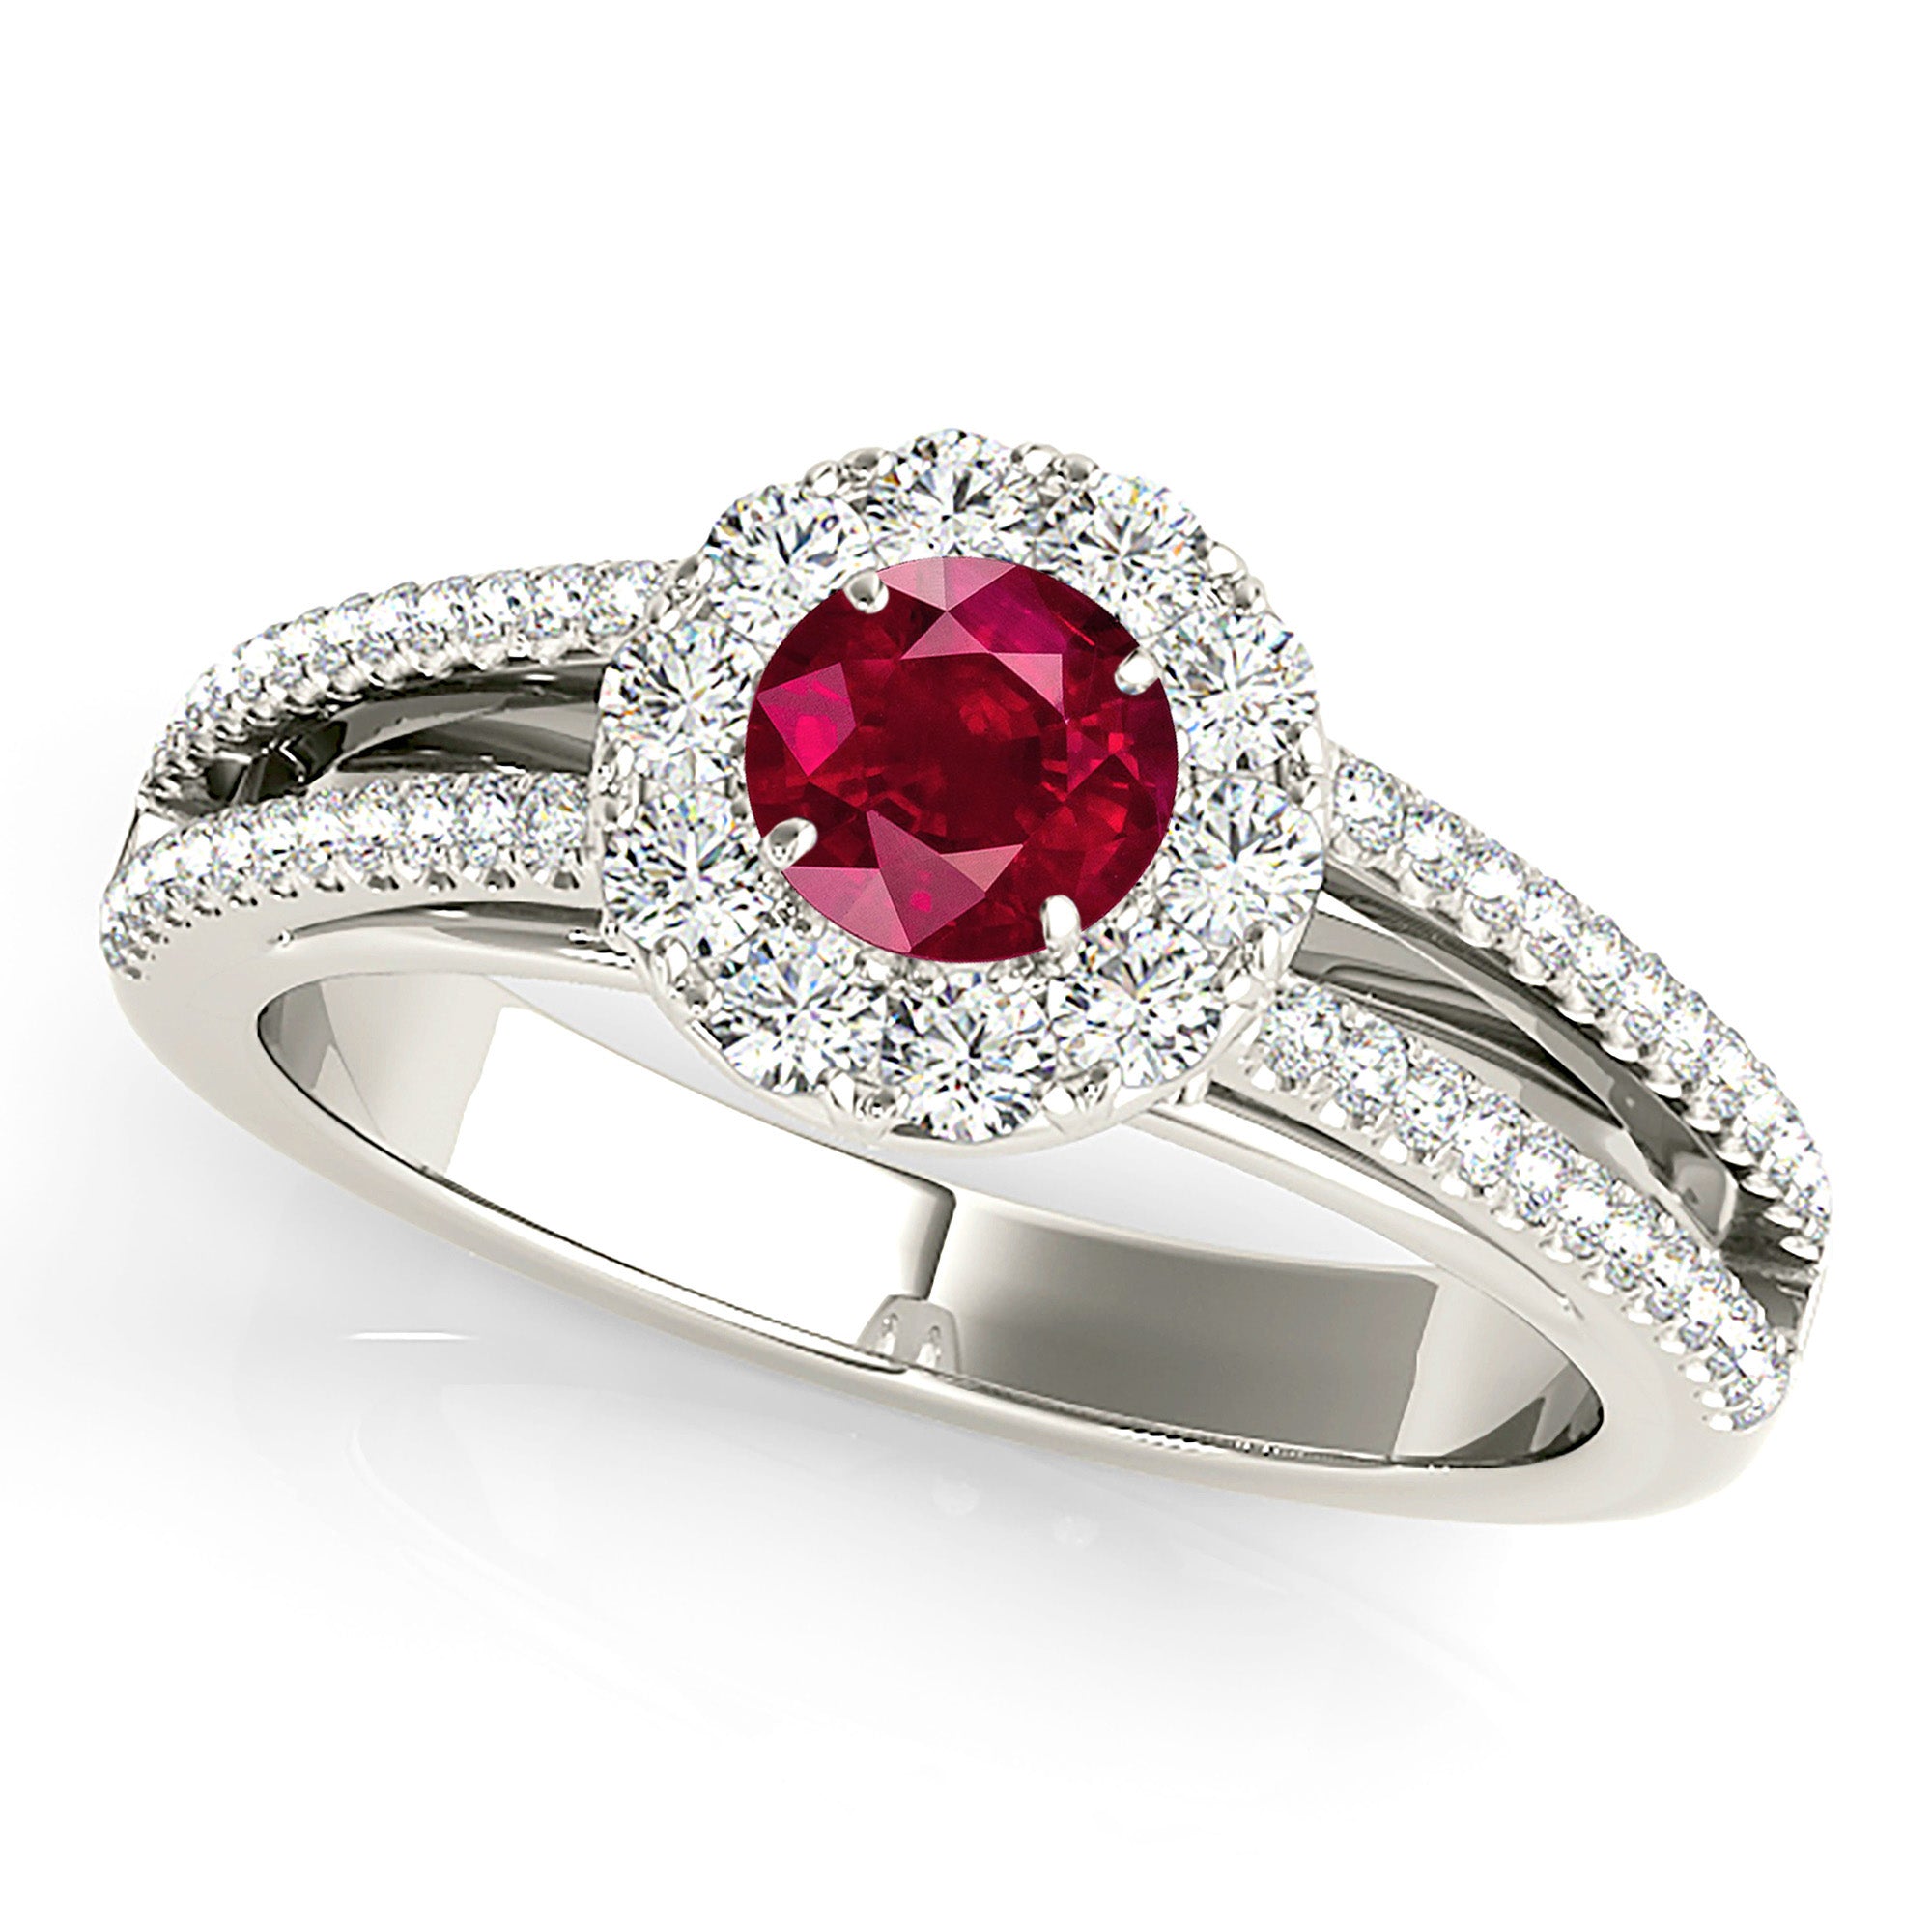 0.94 ct. Genuine Ruby Ring With 0.50 ctw. Diamond Halo And Split Diamond Shank, Diamond Basket | Round Ruby Halo Ring | Natural Ruby Ring-in 14K/18K White, Yellow, Rose Gold and Platinum - Christmas Jewelry Gift -VIRABYANI